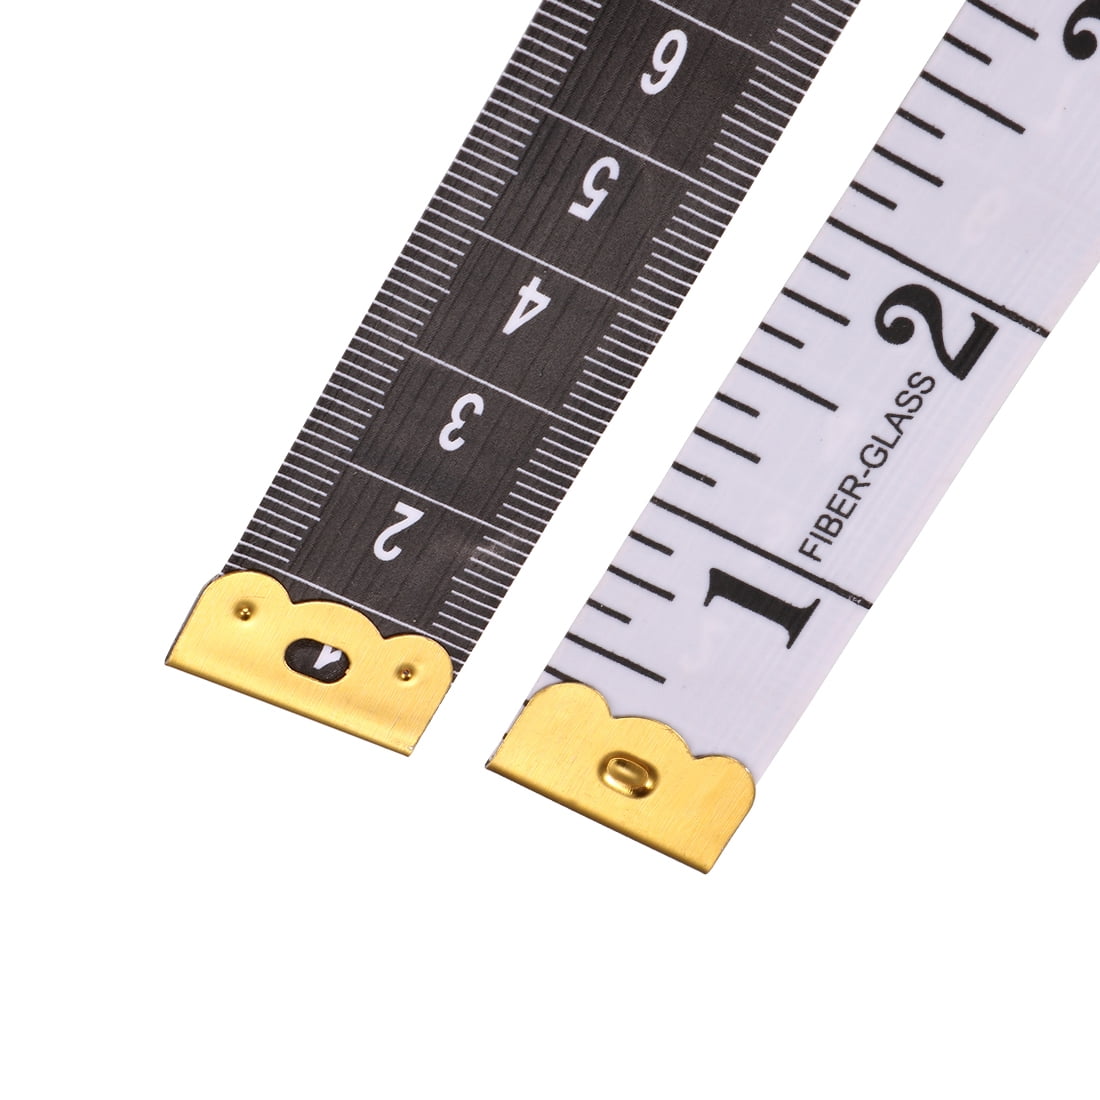 79 Inches/200cm Soft Tape Measure,Pocket Measuring Tape for Body